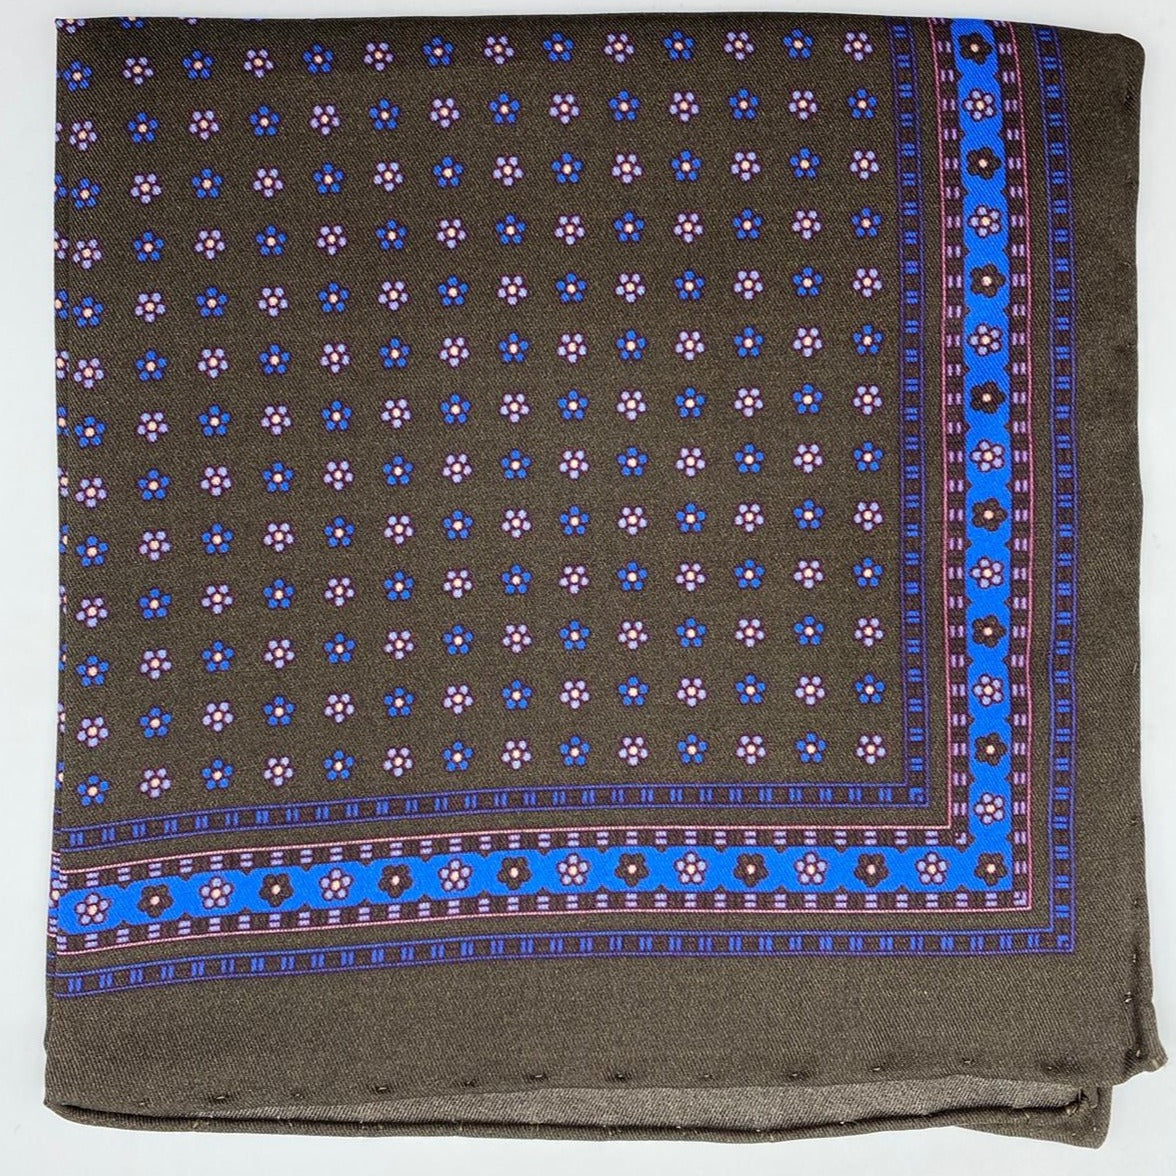 Cruciani & Bella 100% Printed Silk  Hand-rolled Olive Green and Blue Floral Motif Pocket Square Handmade in England 32 cm  X 32 cm #4545